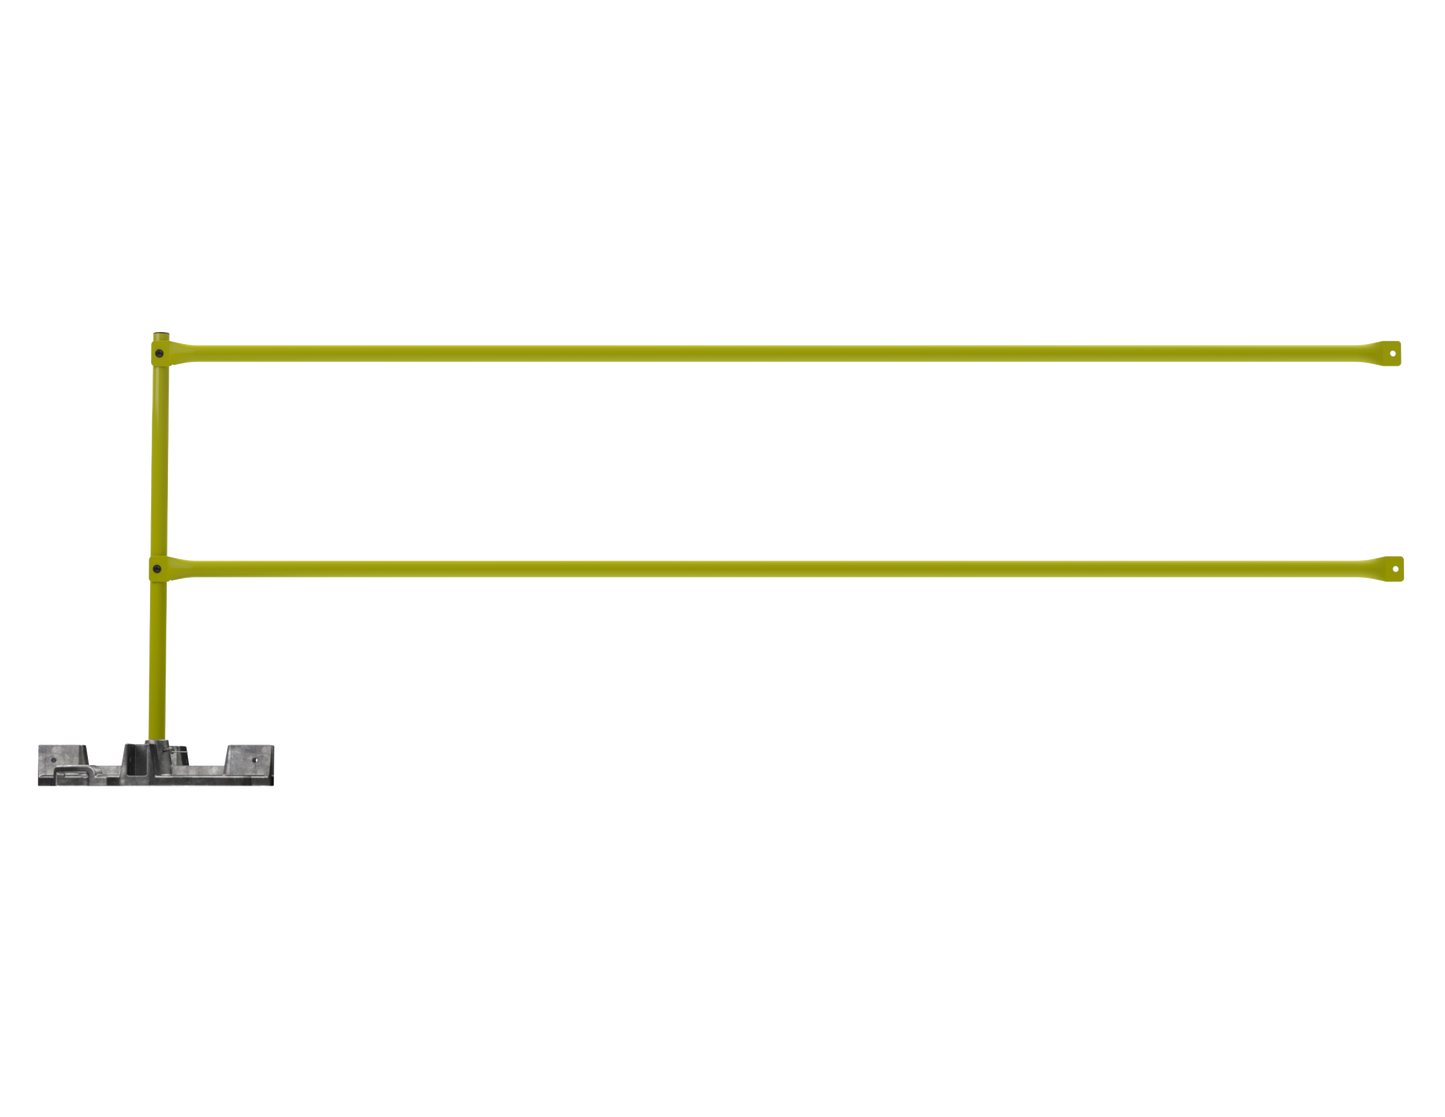 Permanent Ballasted Guardrail System